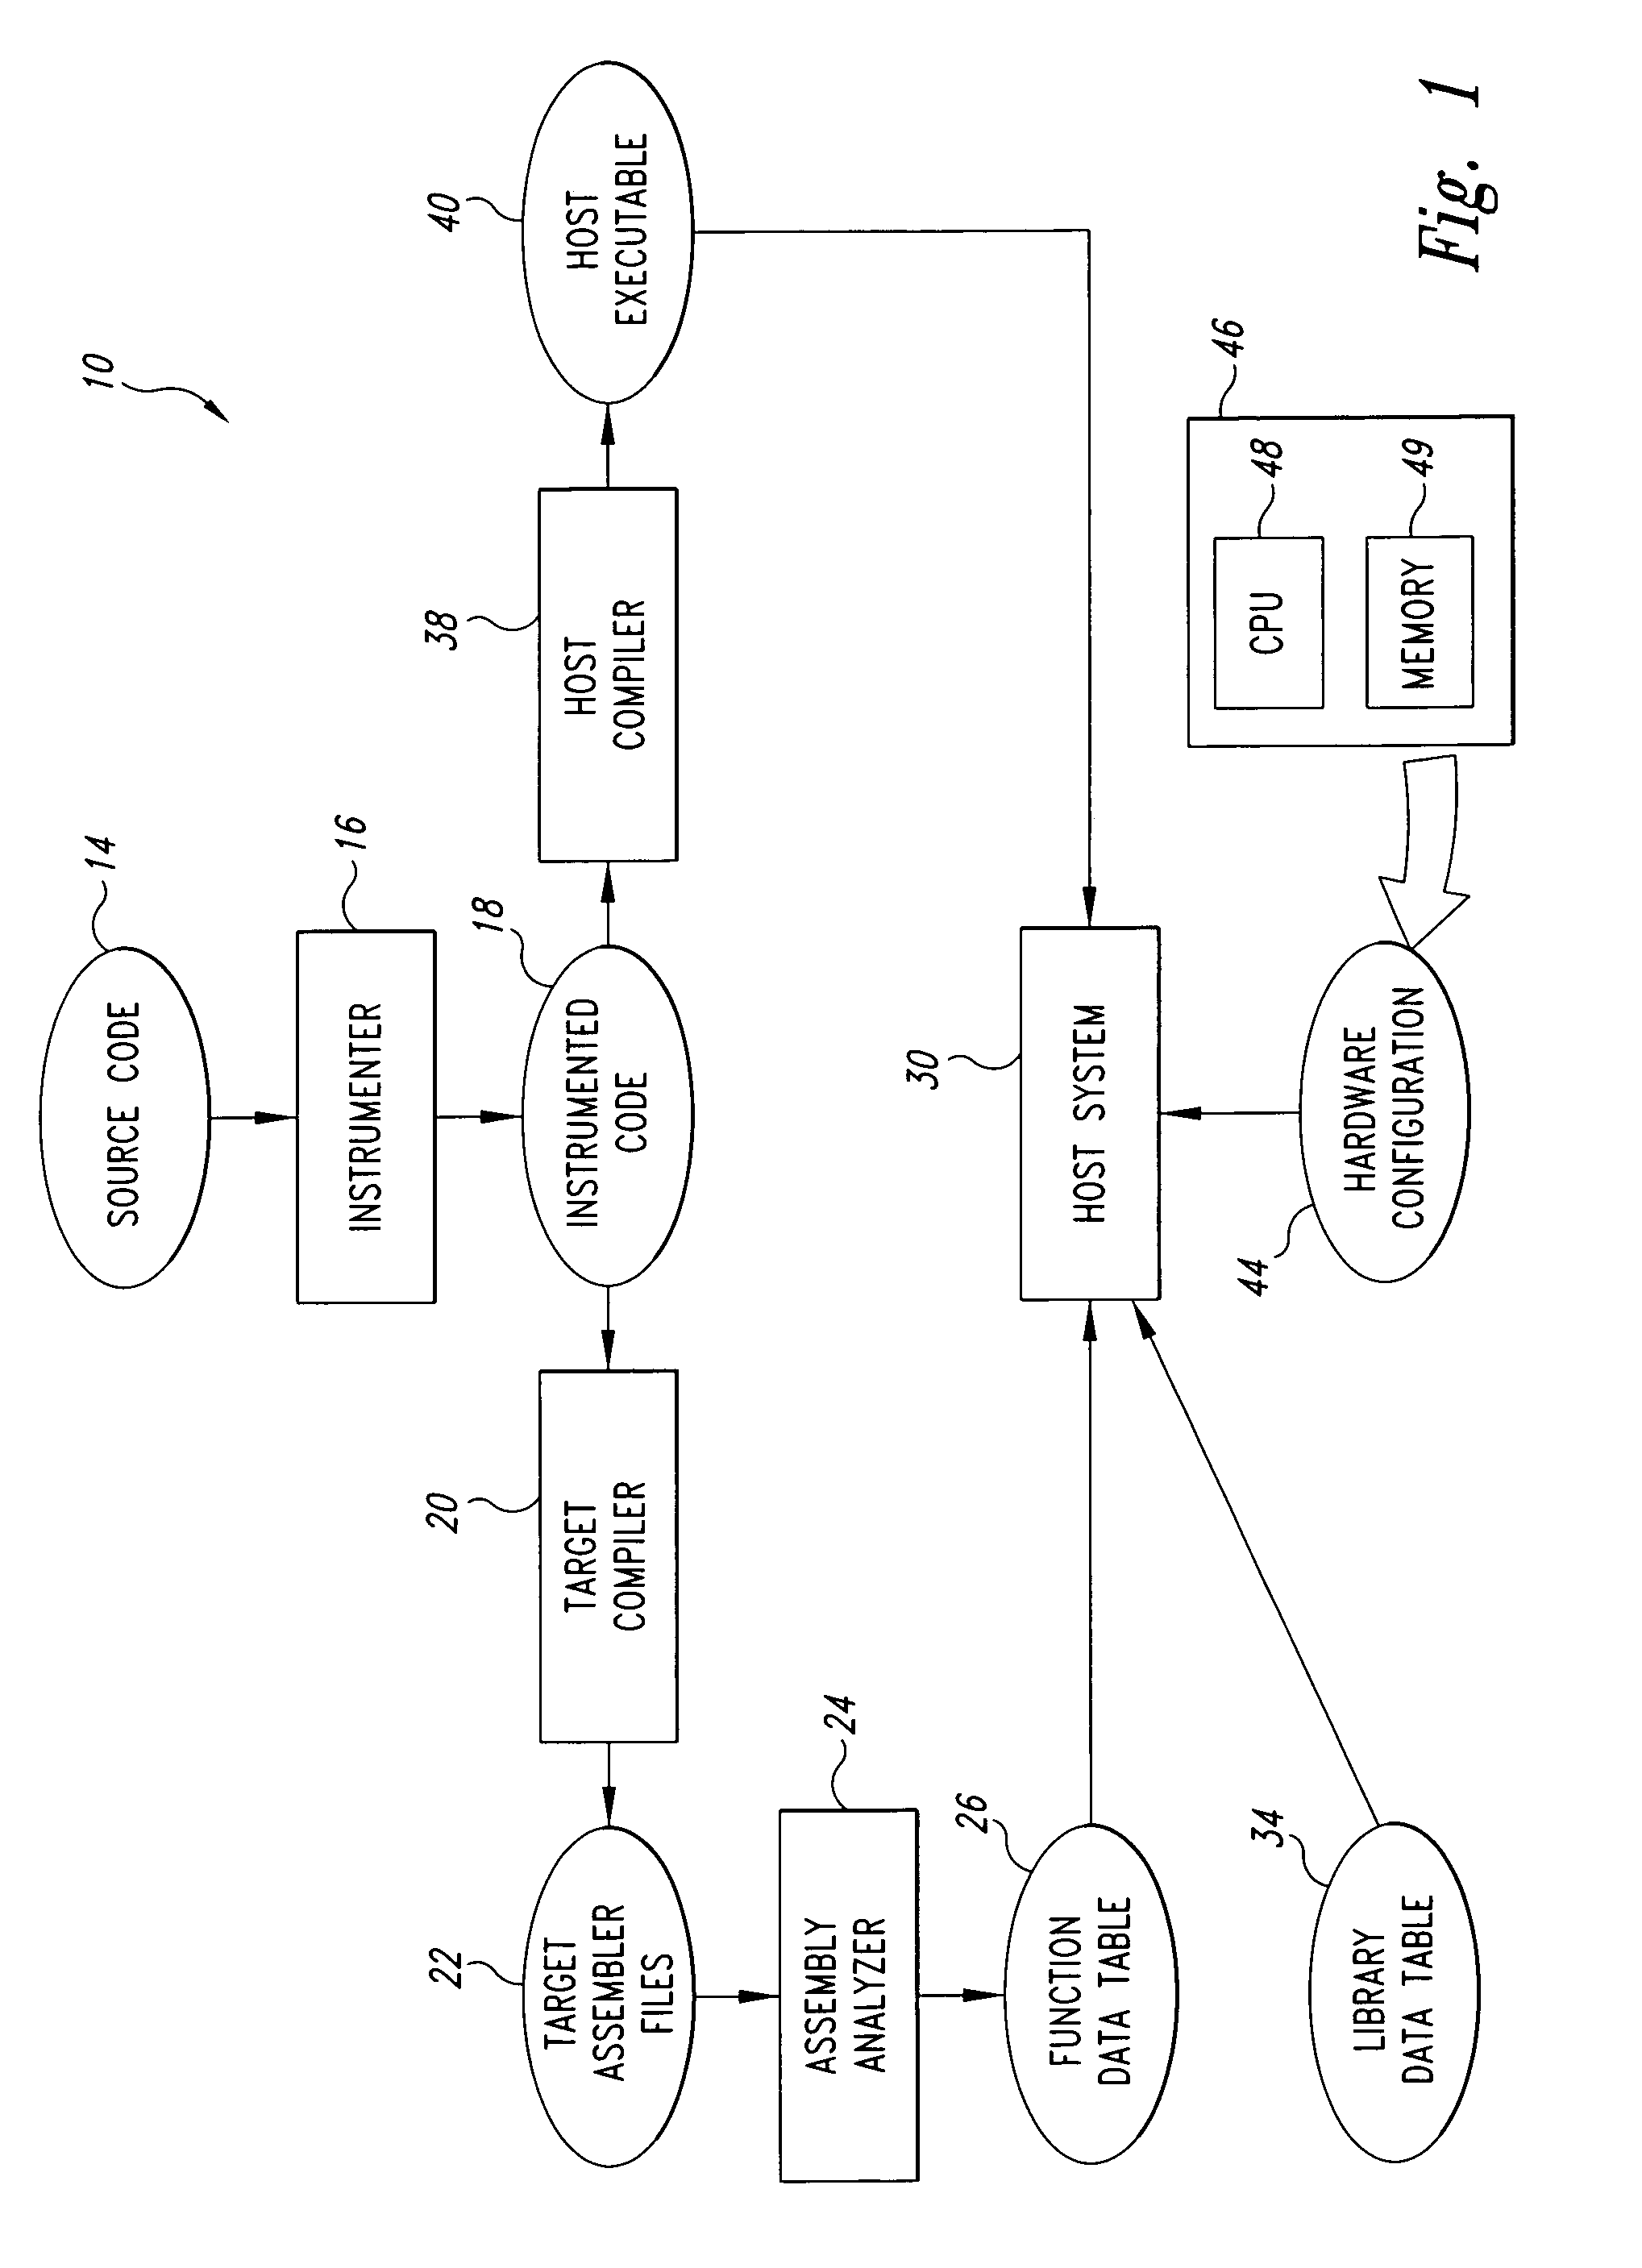 Method and system for simulating execution of a target program in a simulated target system